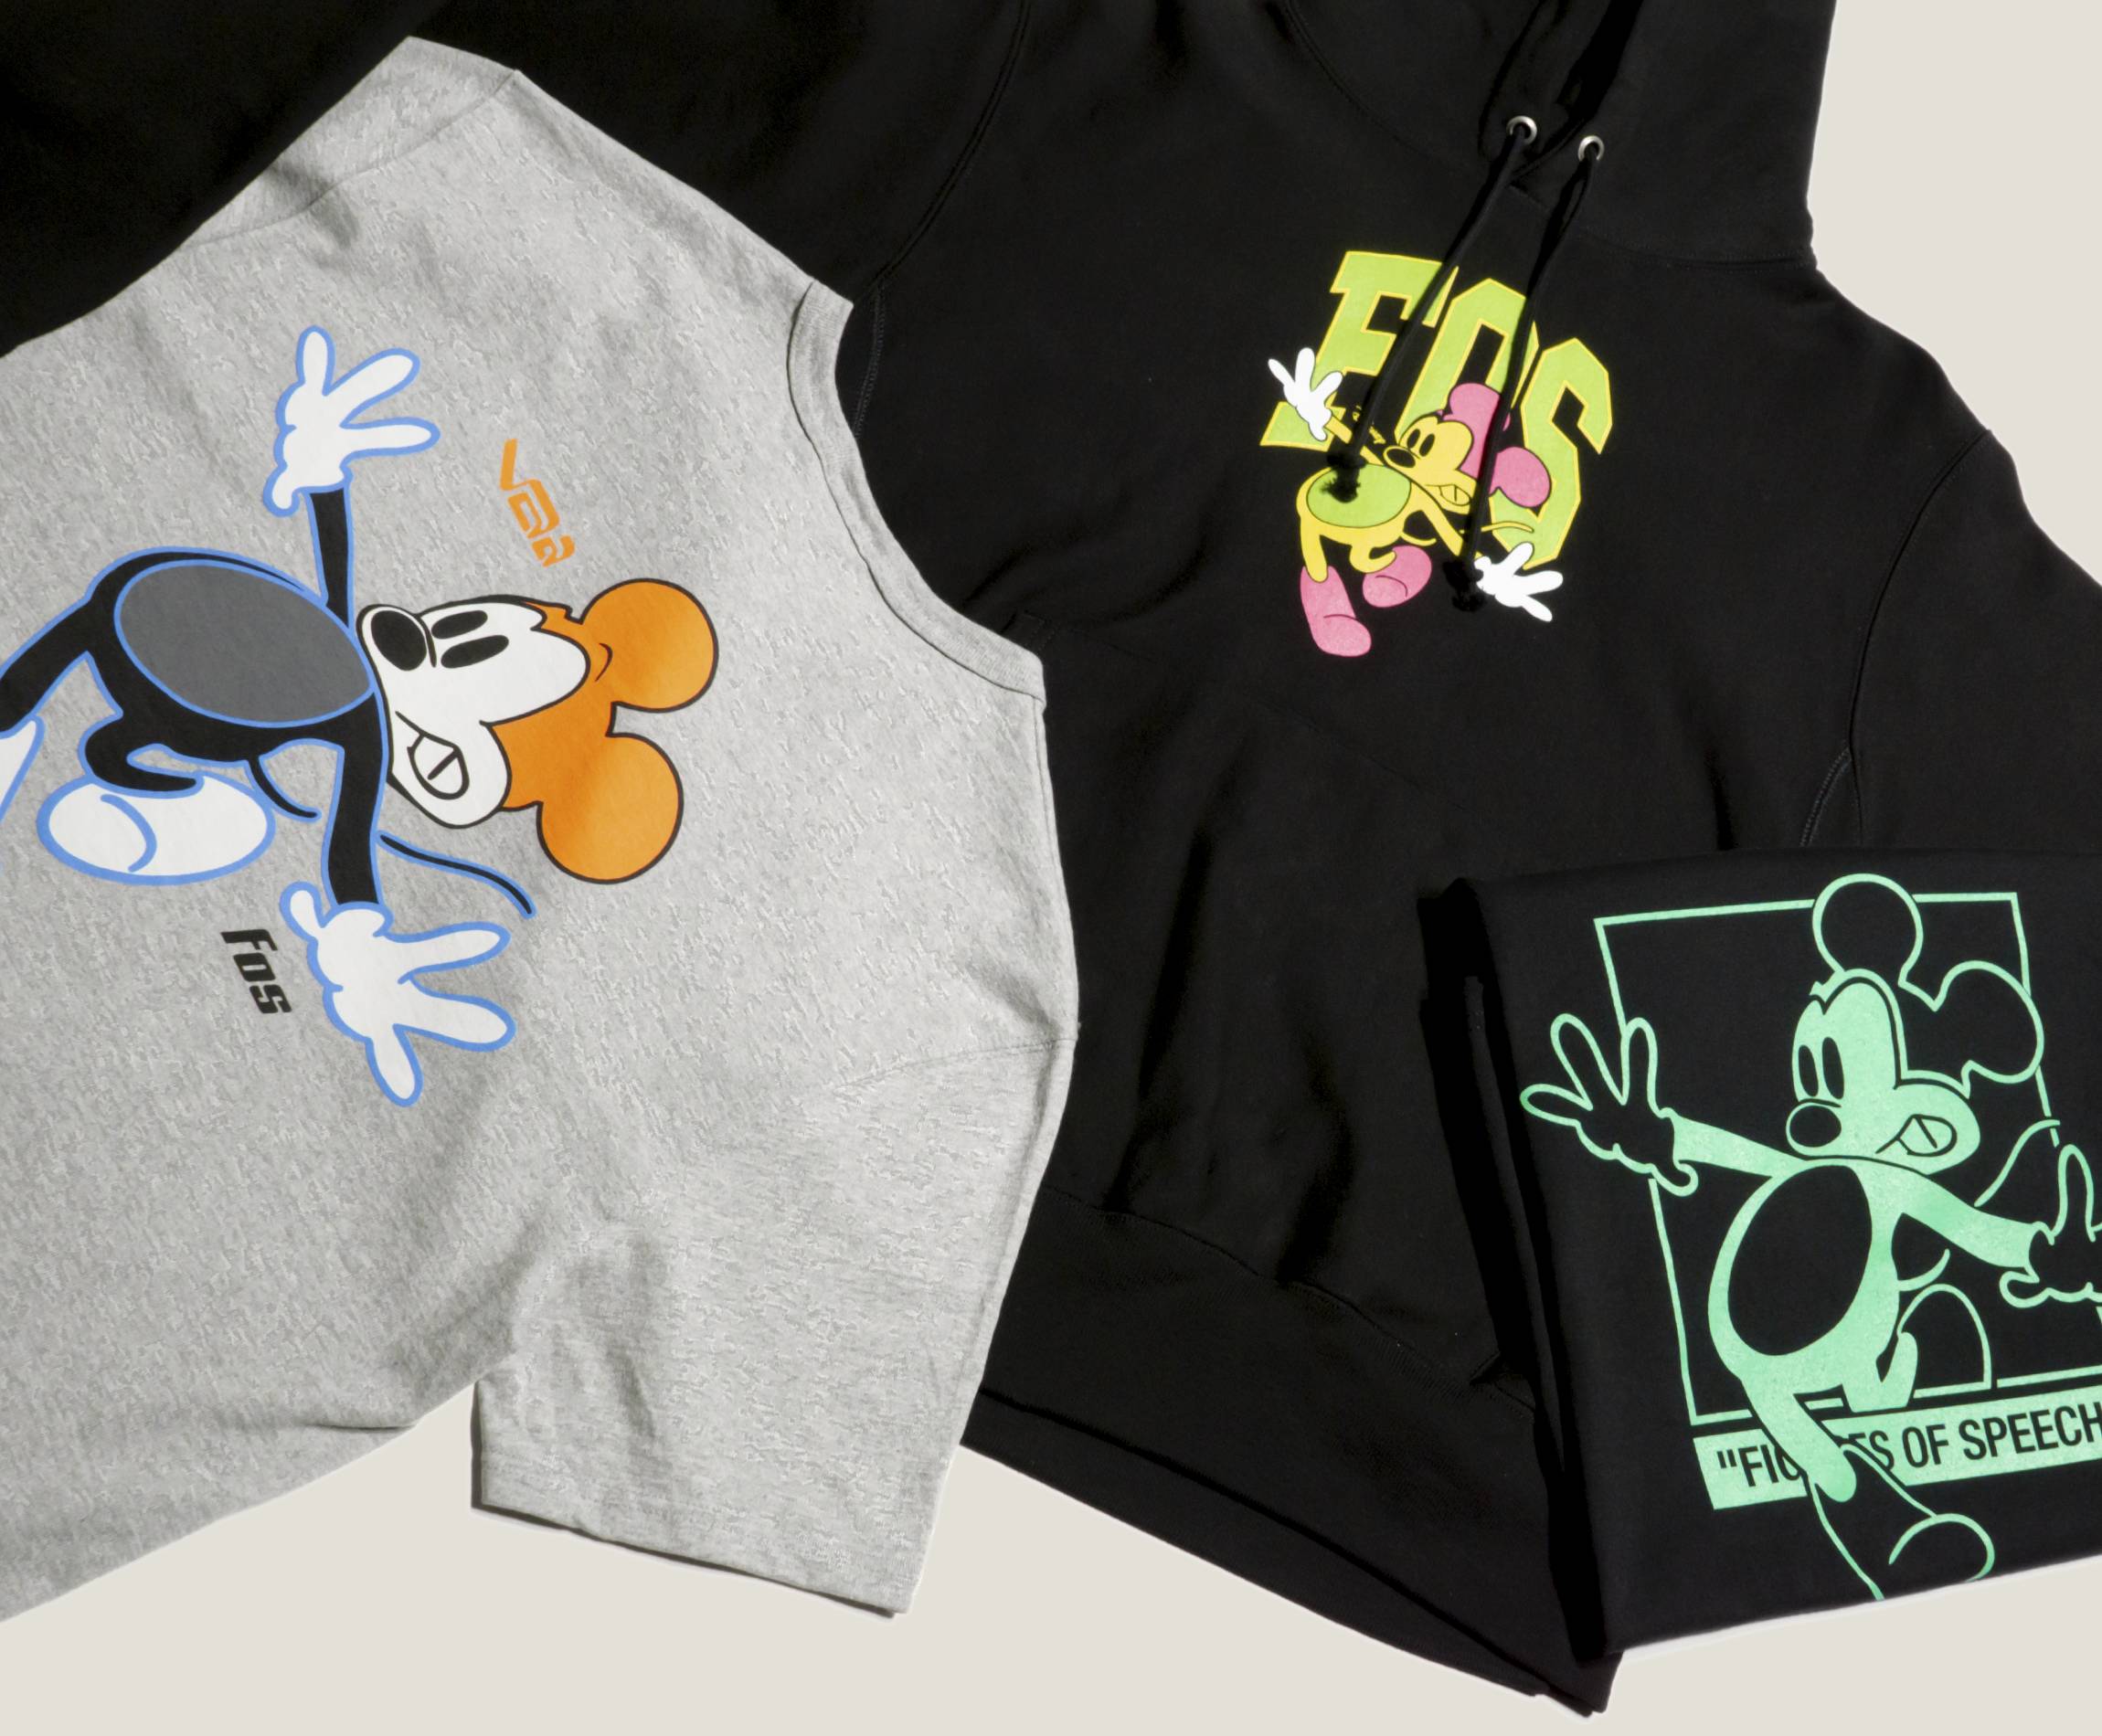 virgil abloh mickey mouse drawing sweatshirts and t-shirts from "figures of speech" exhibit at Brooklyn Museum